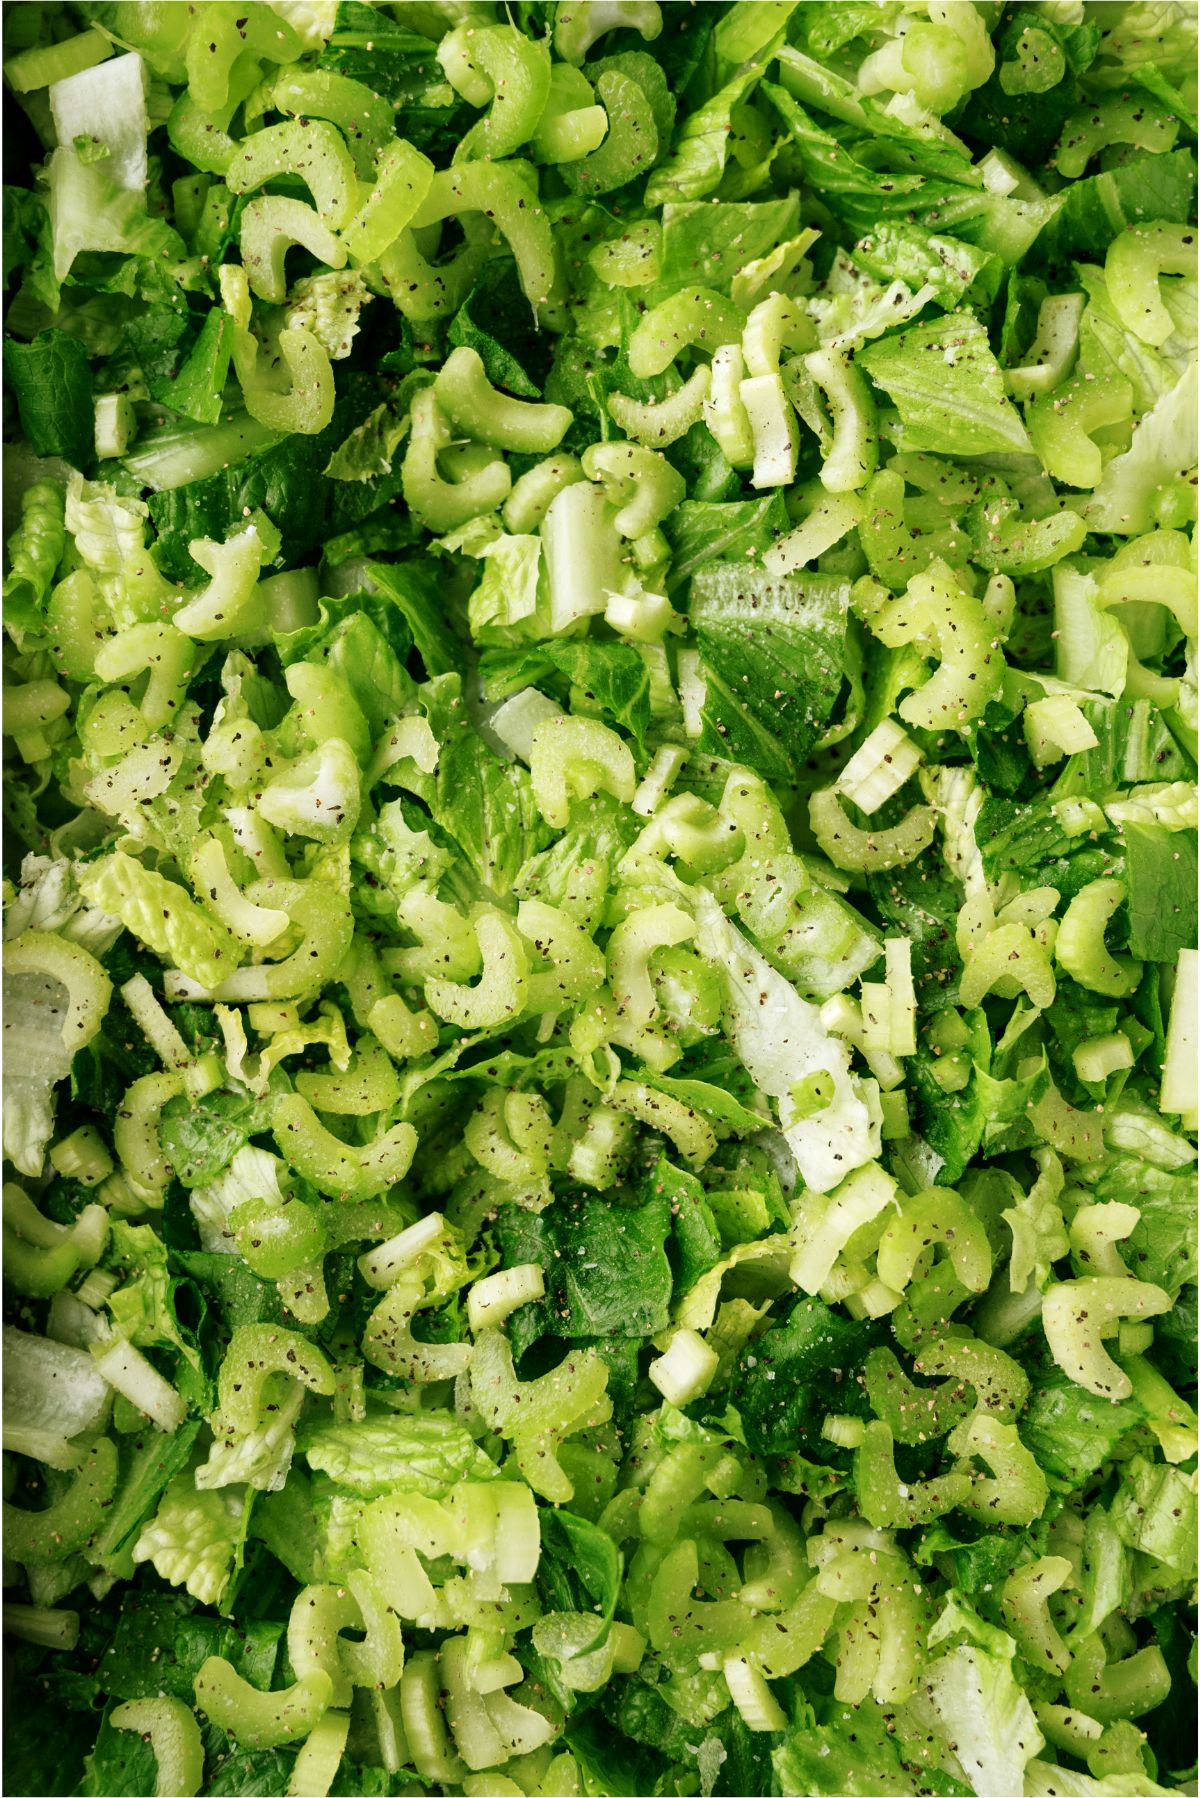 Chopped lettuce with chopped celery and salt and pepper